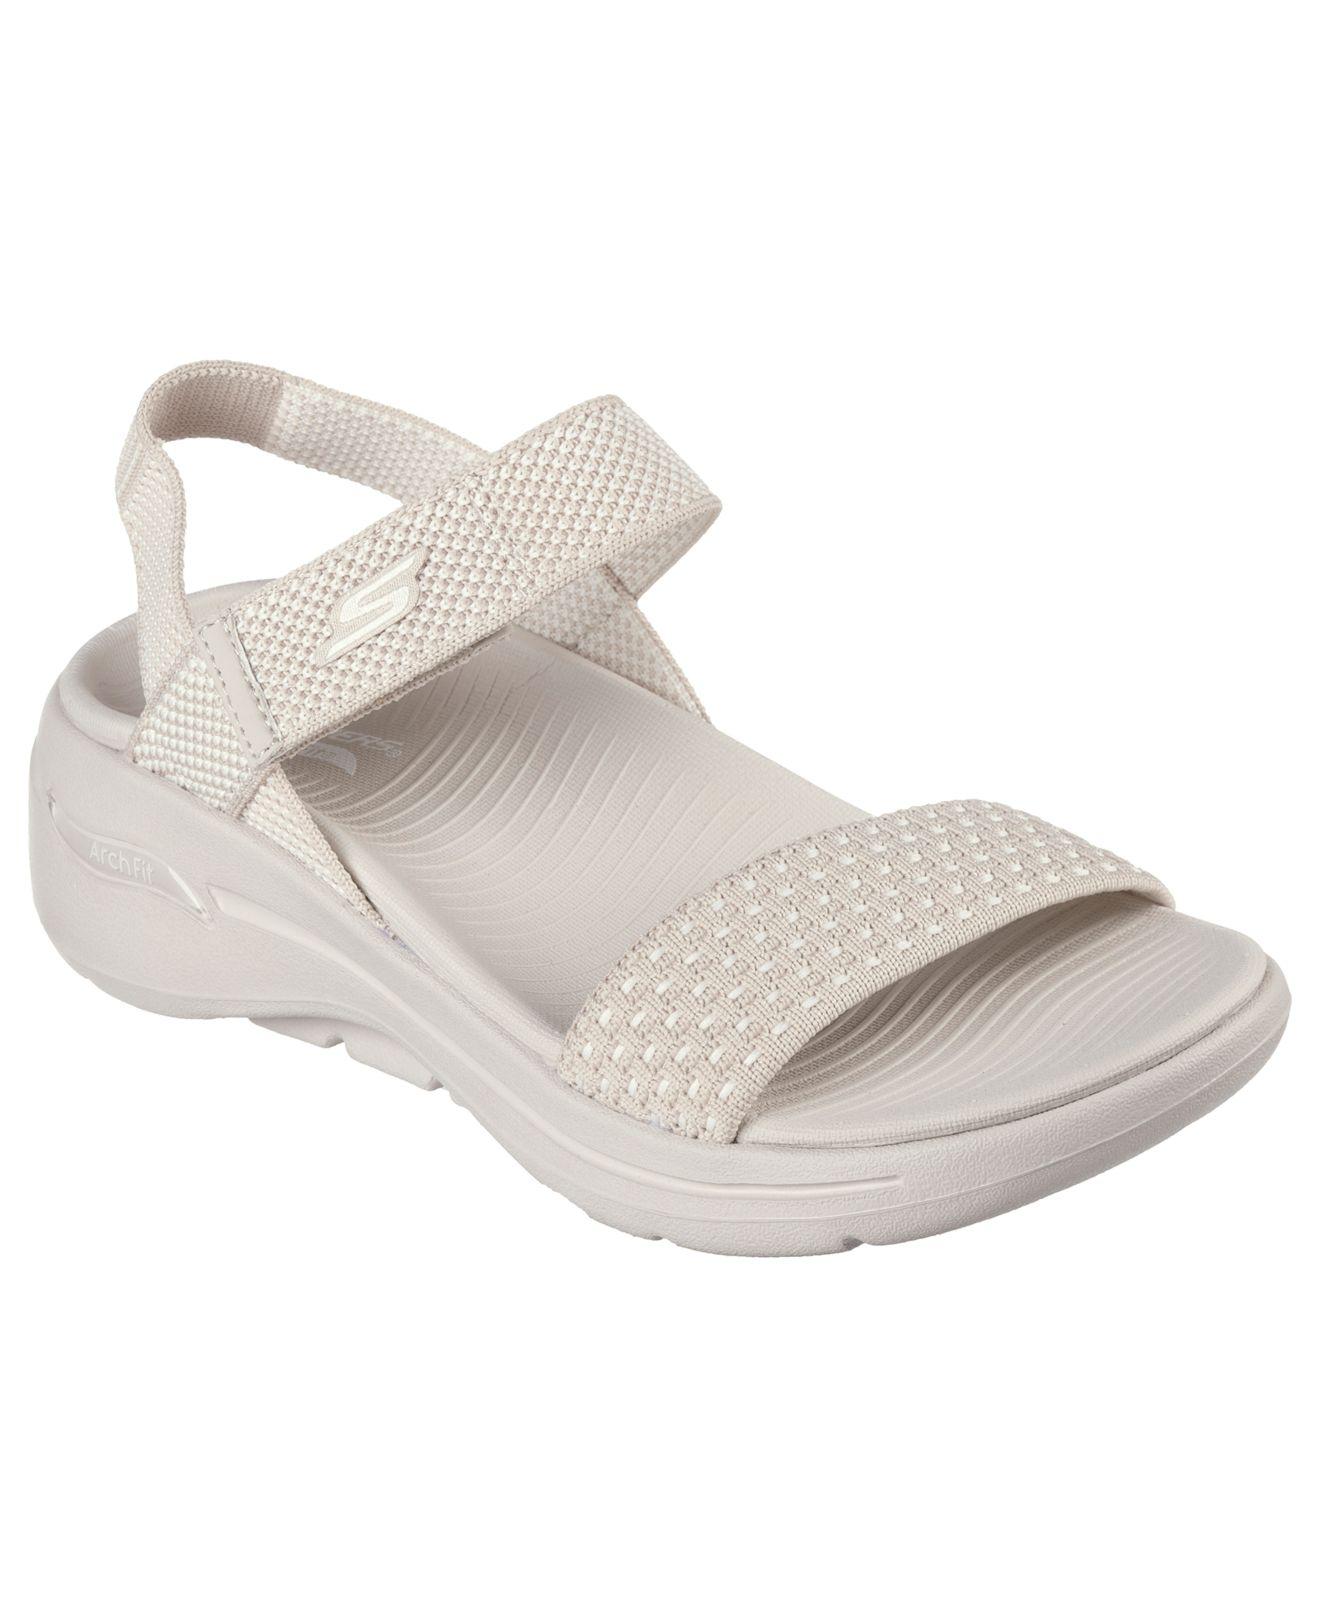 Skechers Go Walk Arch Fit Sandal - Polished Sandals From Finish Line in ...